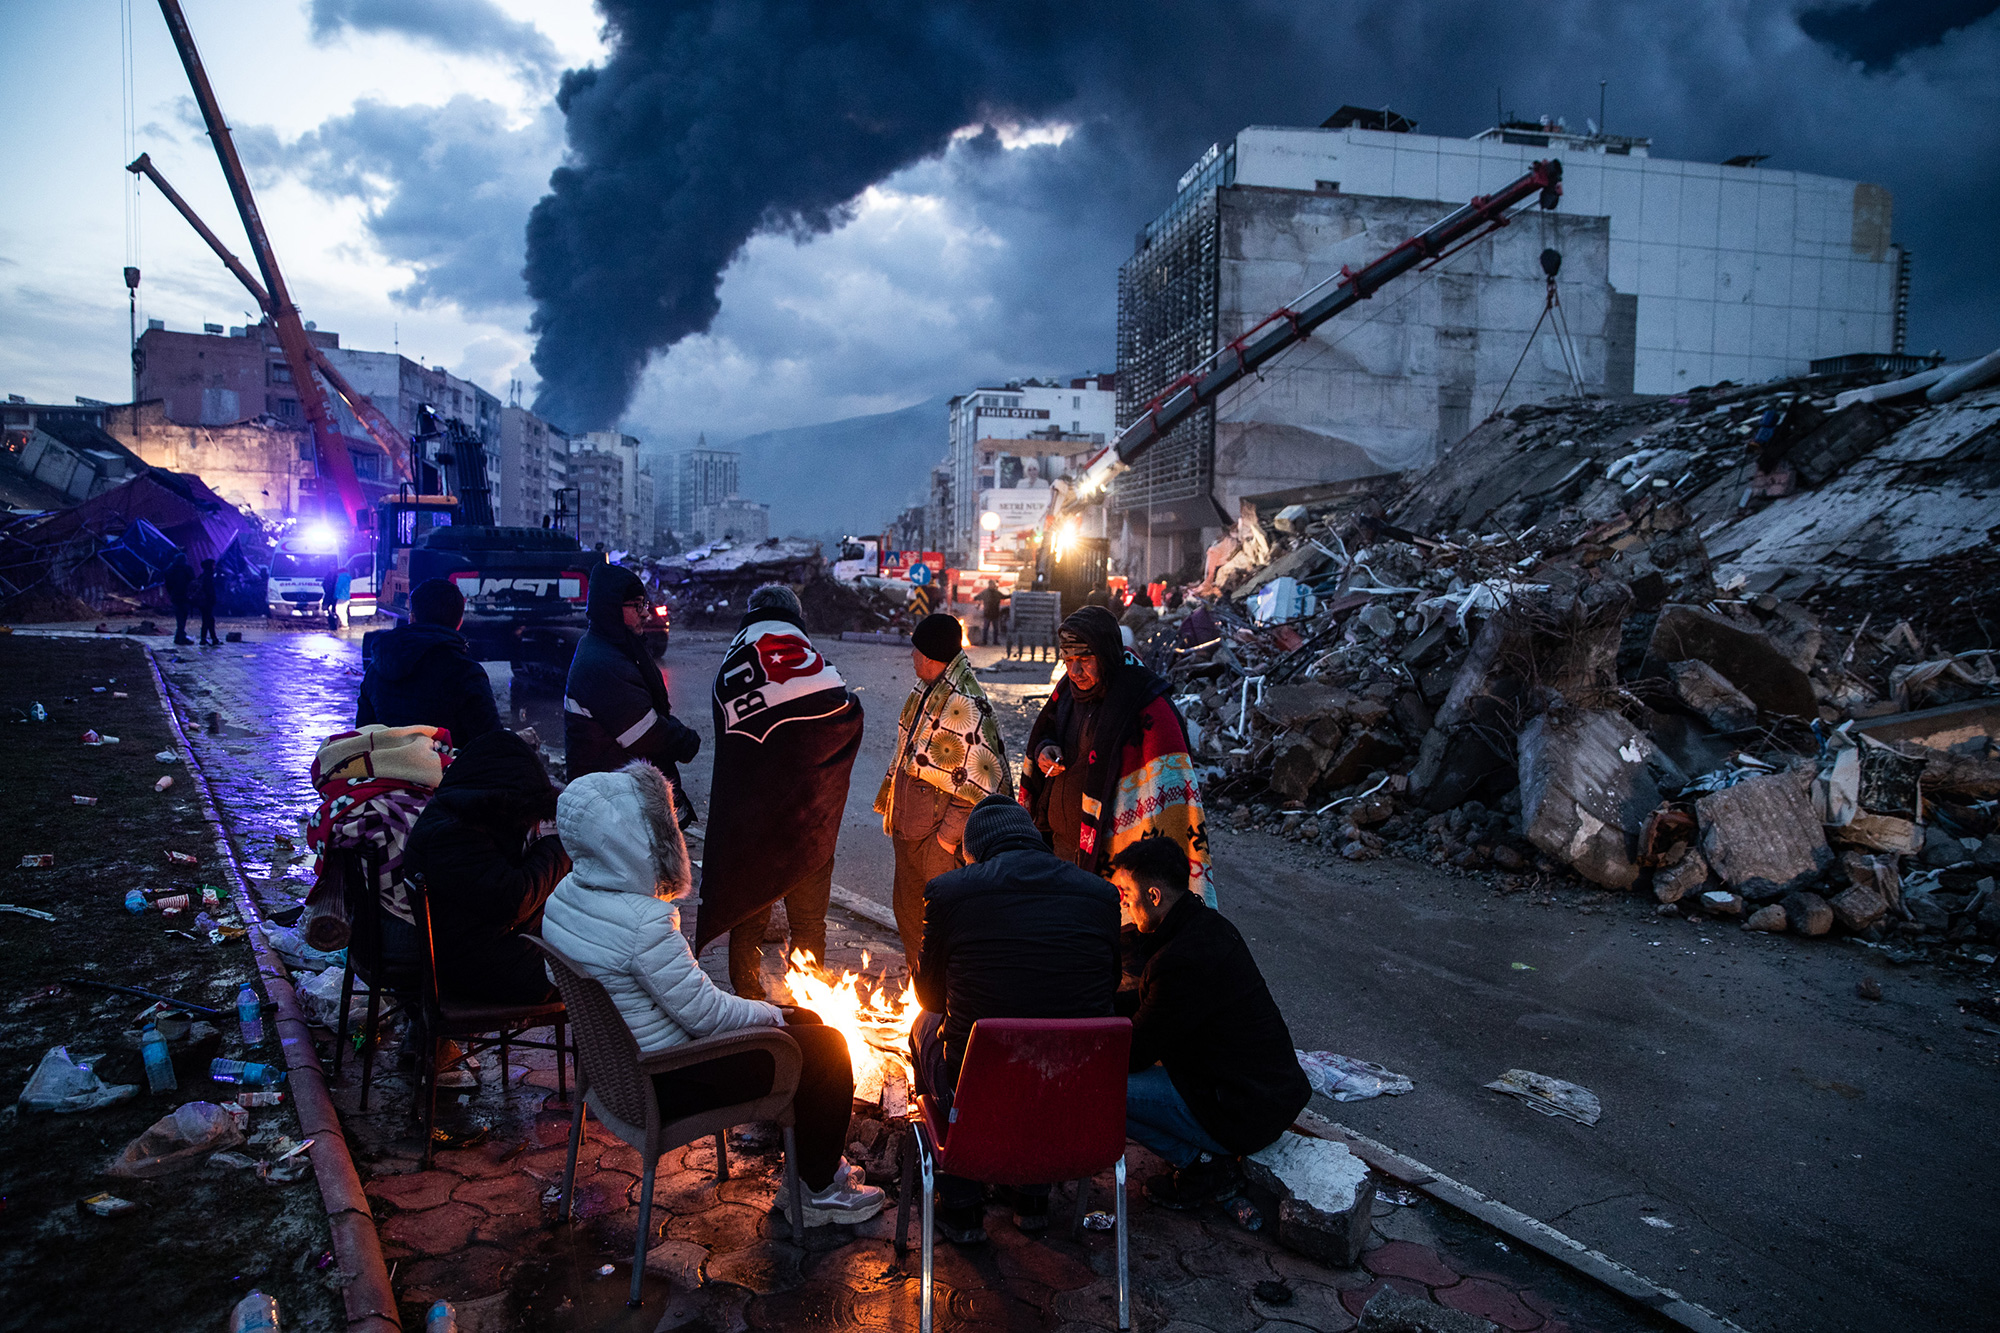 Survivors huddle around a fire as they wait for news of their loved ones in Iskenderun, Turkey.